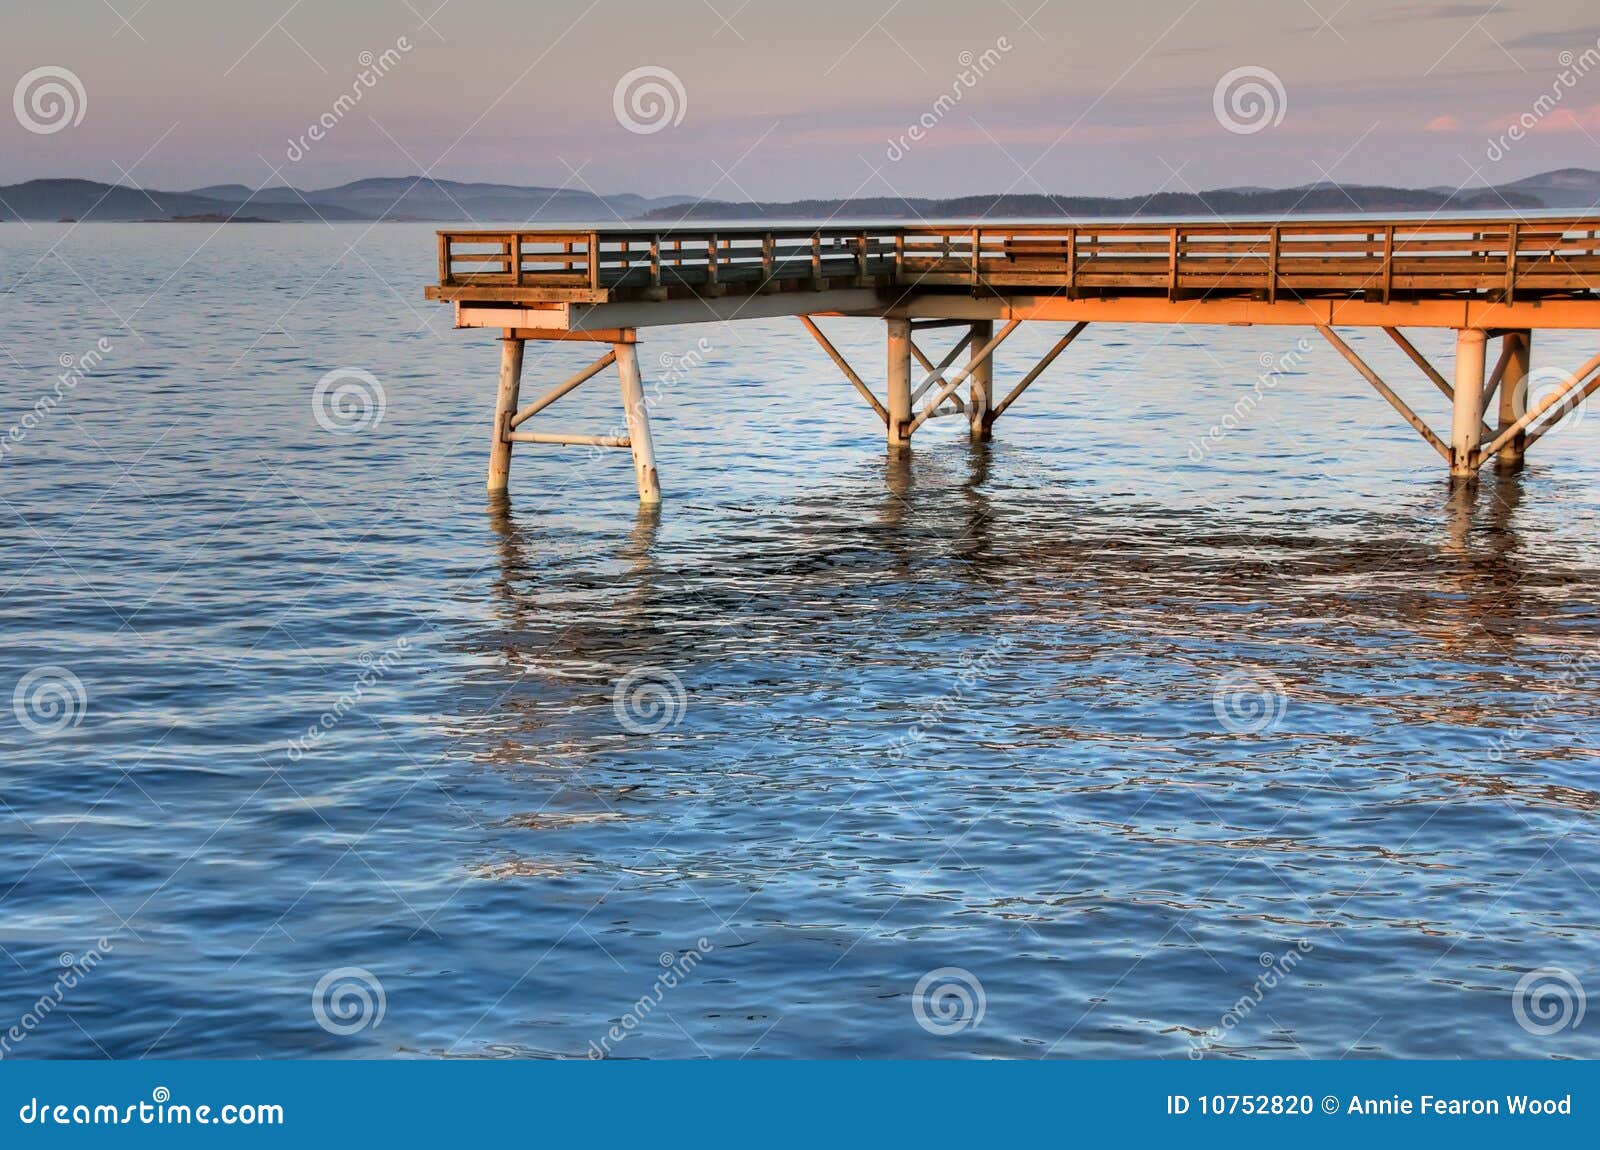 sunset on a wooden fishing pier, sidney, bc